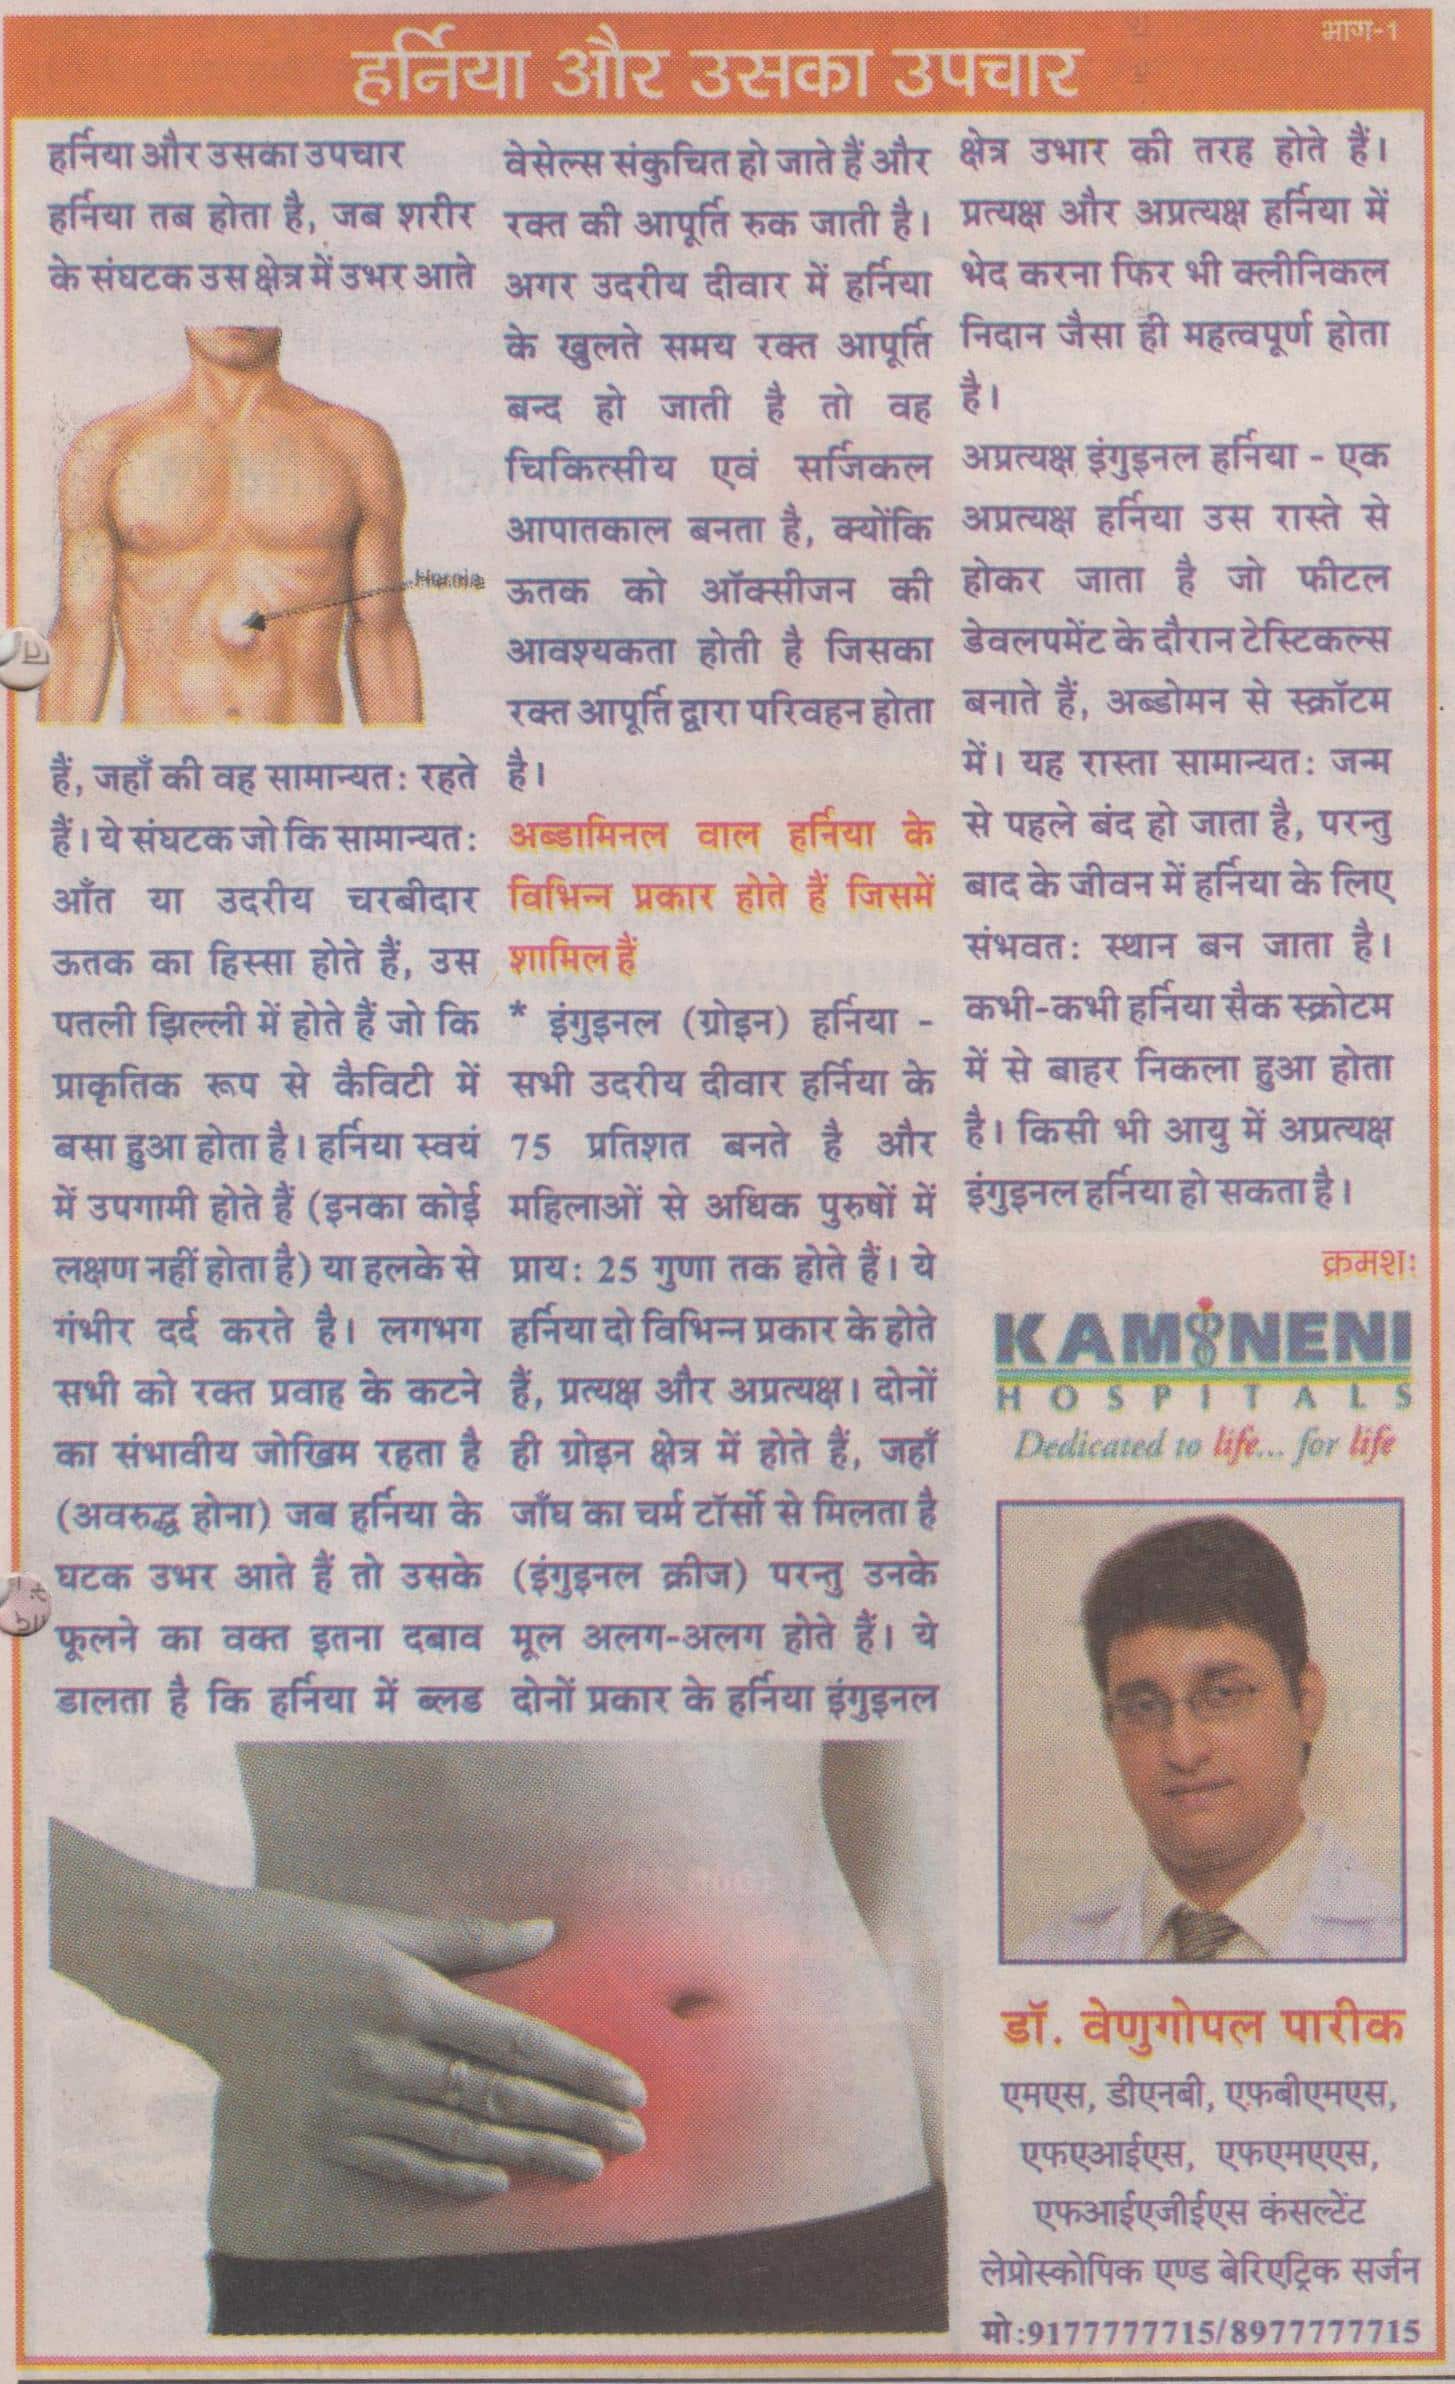 Hemorrhoid signs and symptoms and treatment - Explained by Dr V Pareek in Hindi Newspaper